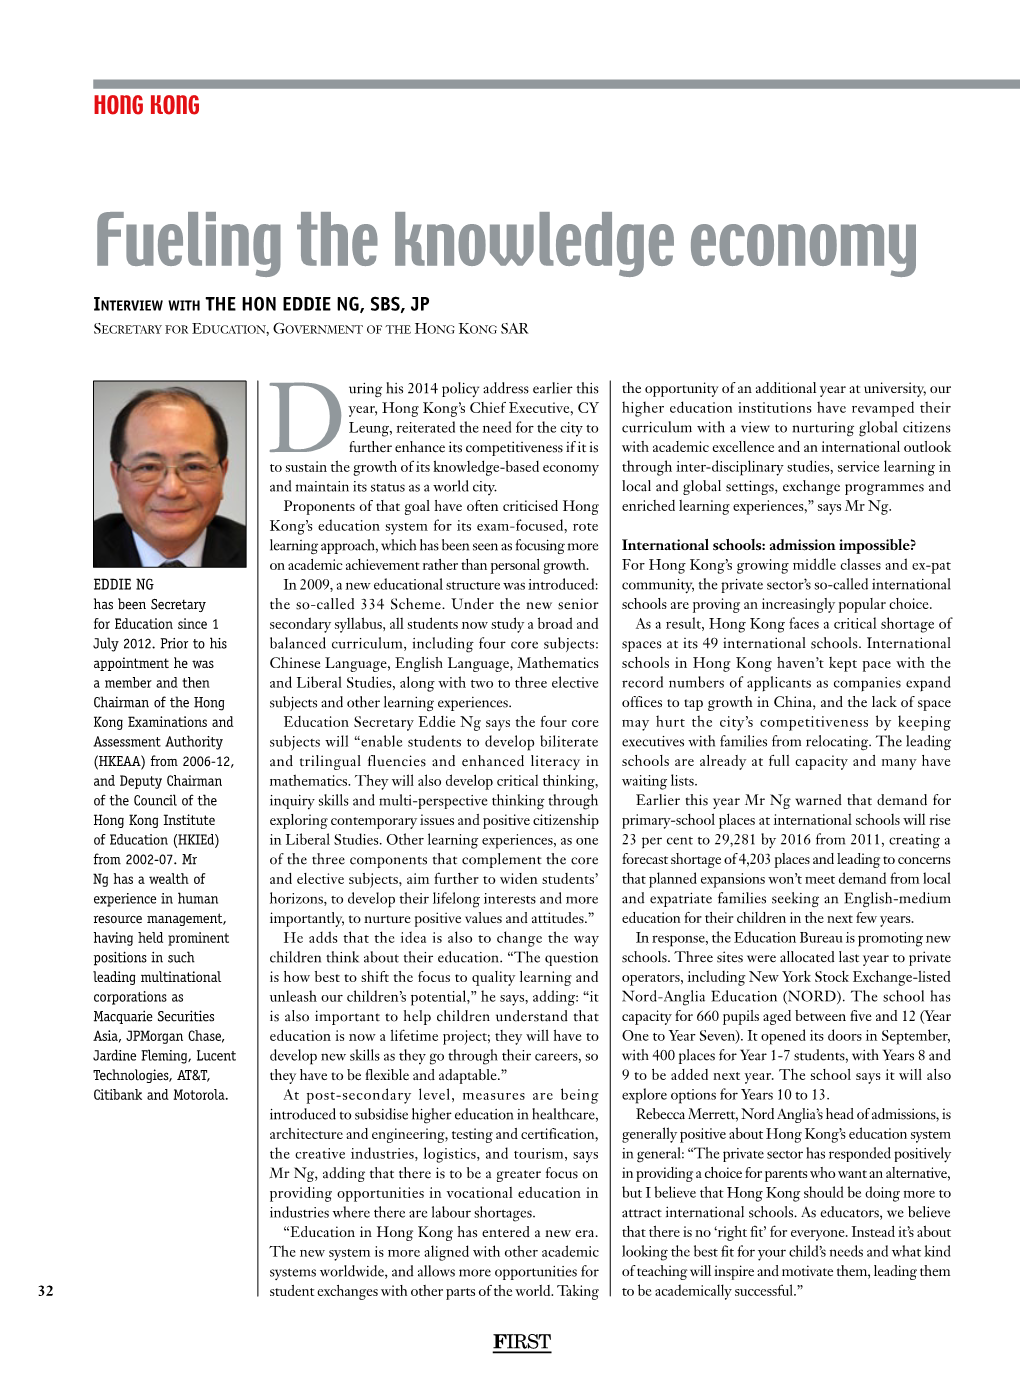 Fueling the Knowledge Economy Interview with the Hon Eddie Ng, SBS, JP Secretary for Education, Government of the Hong Kong SAR